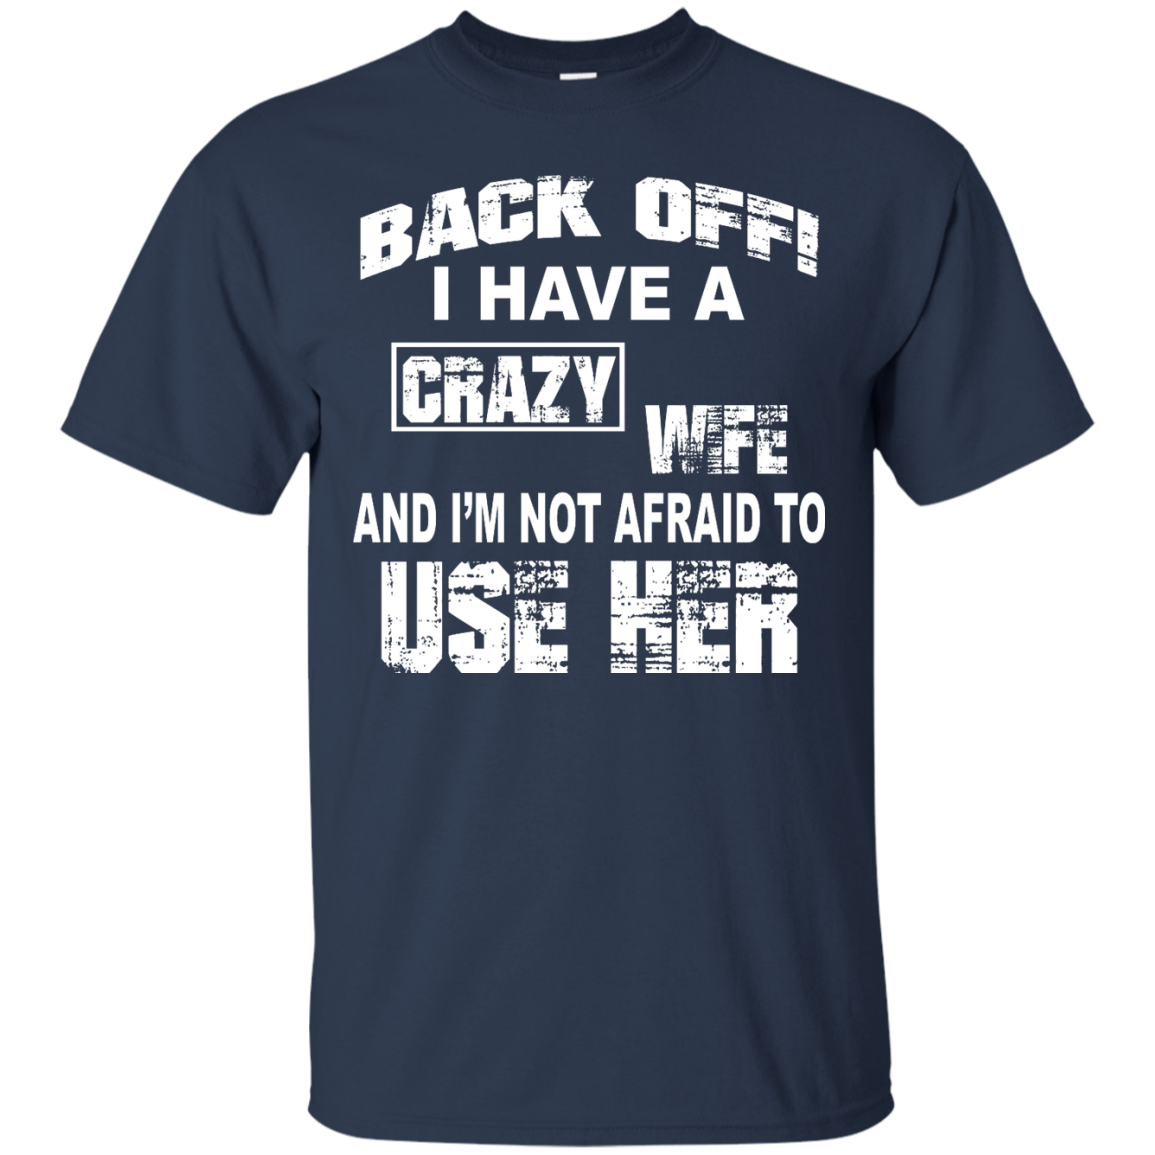 Back off - I have a crazy wife - I'm not afraid to use her t-shirt,tank ...